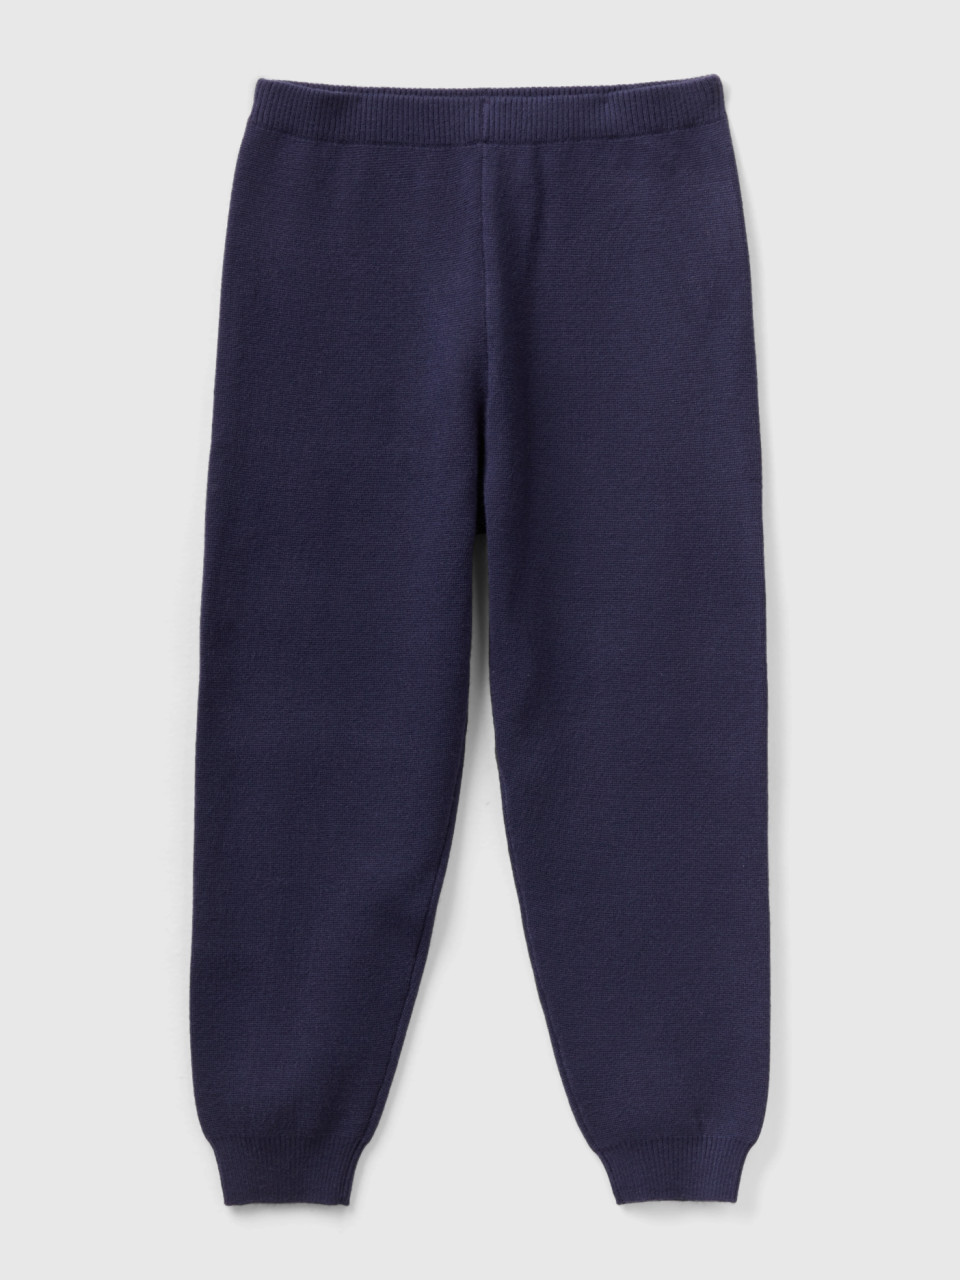 Benetton, Knit Trousers With Drawstring, Dark Blue, Kids